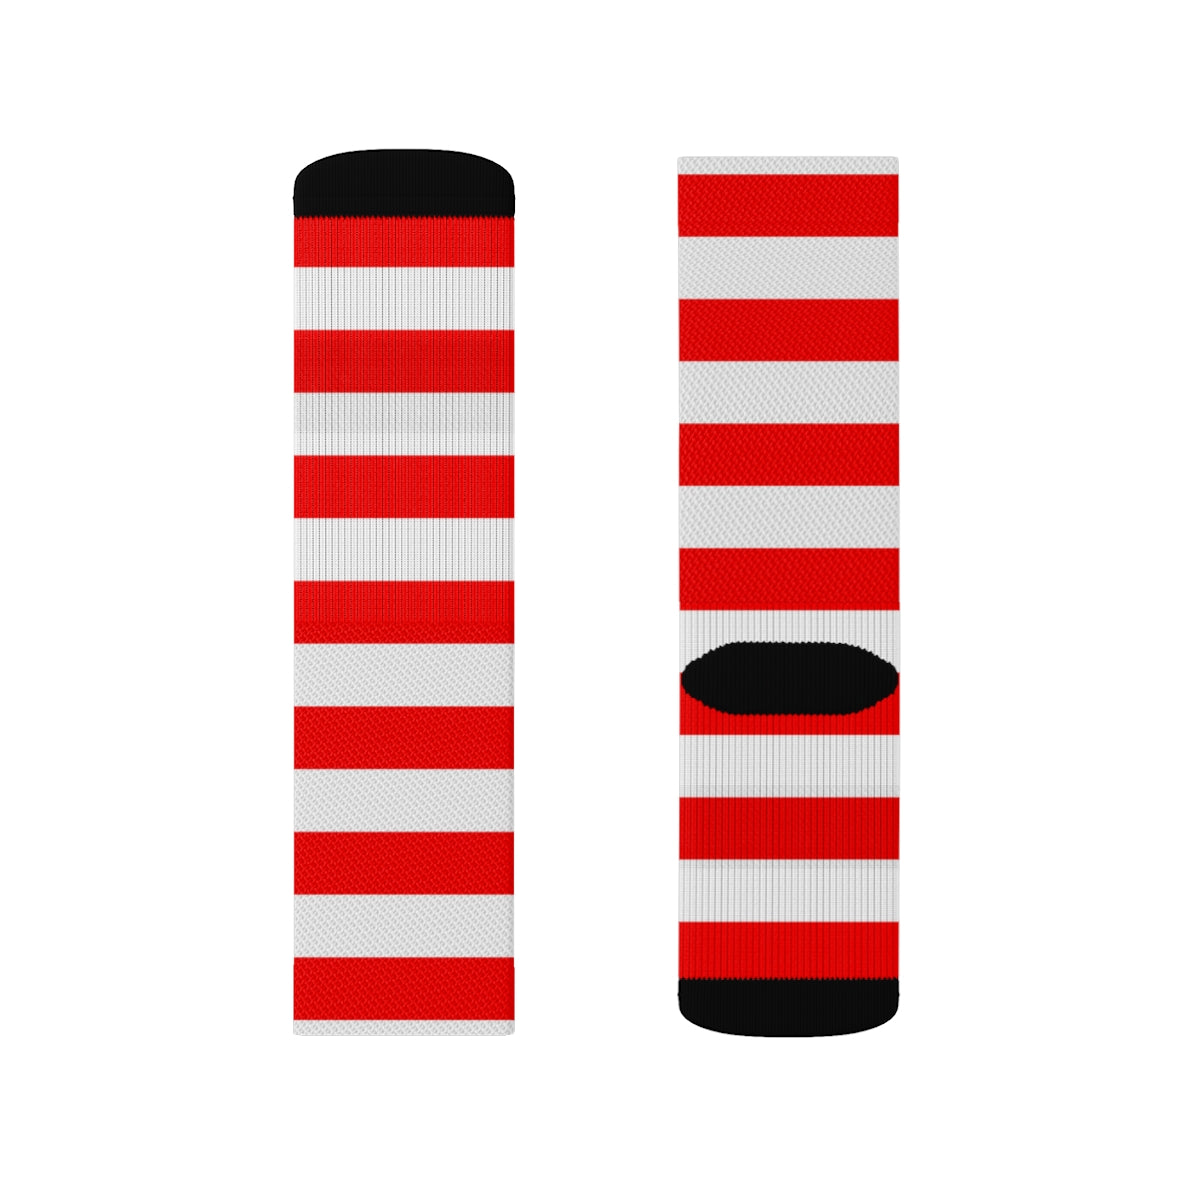 Red and White Striped Socks, Crew 3D Sublimation Women Men Designer Fun Novelty Cool Funky Casual Cute Unique Gift Starcove Fashion